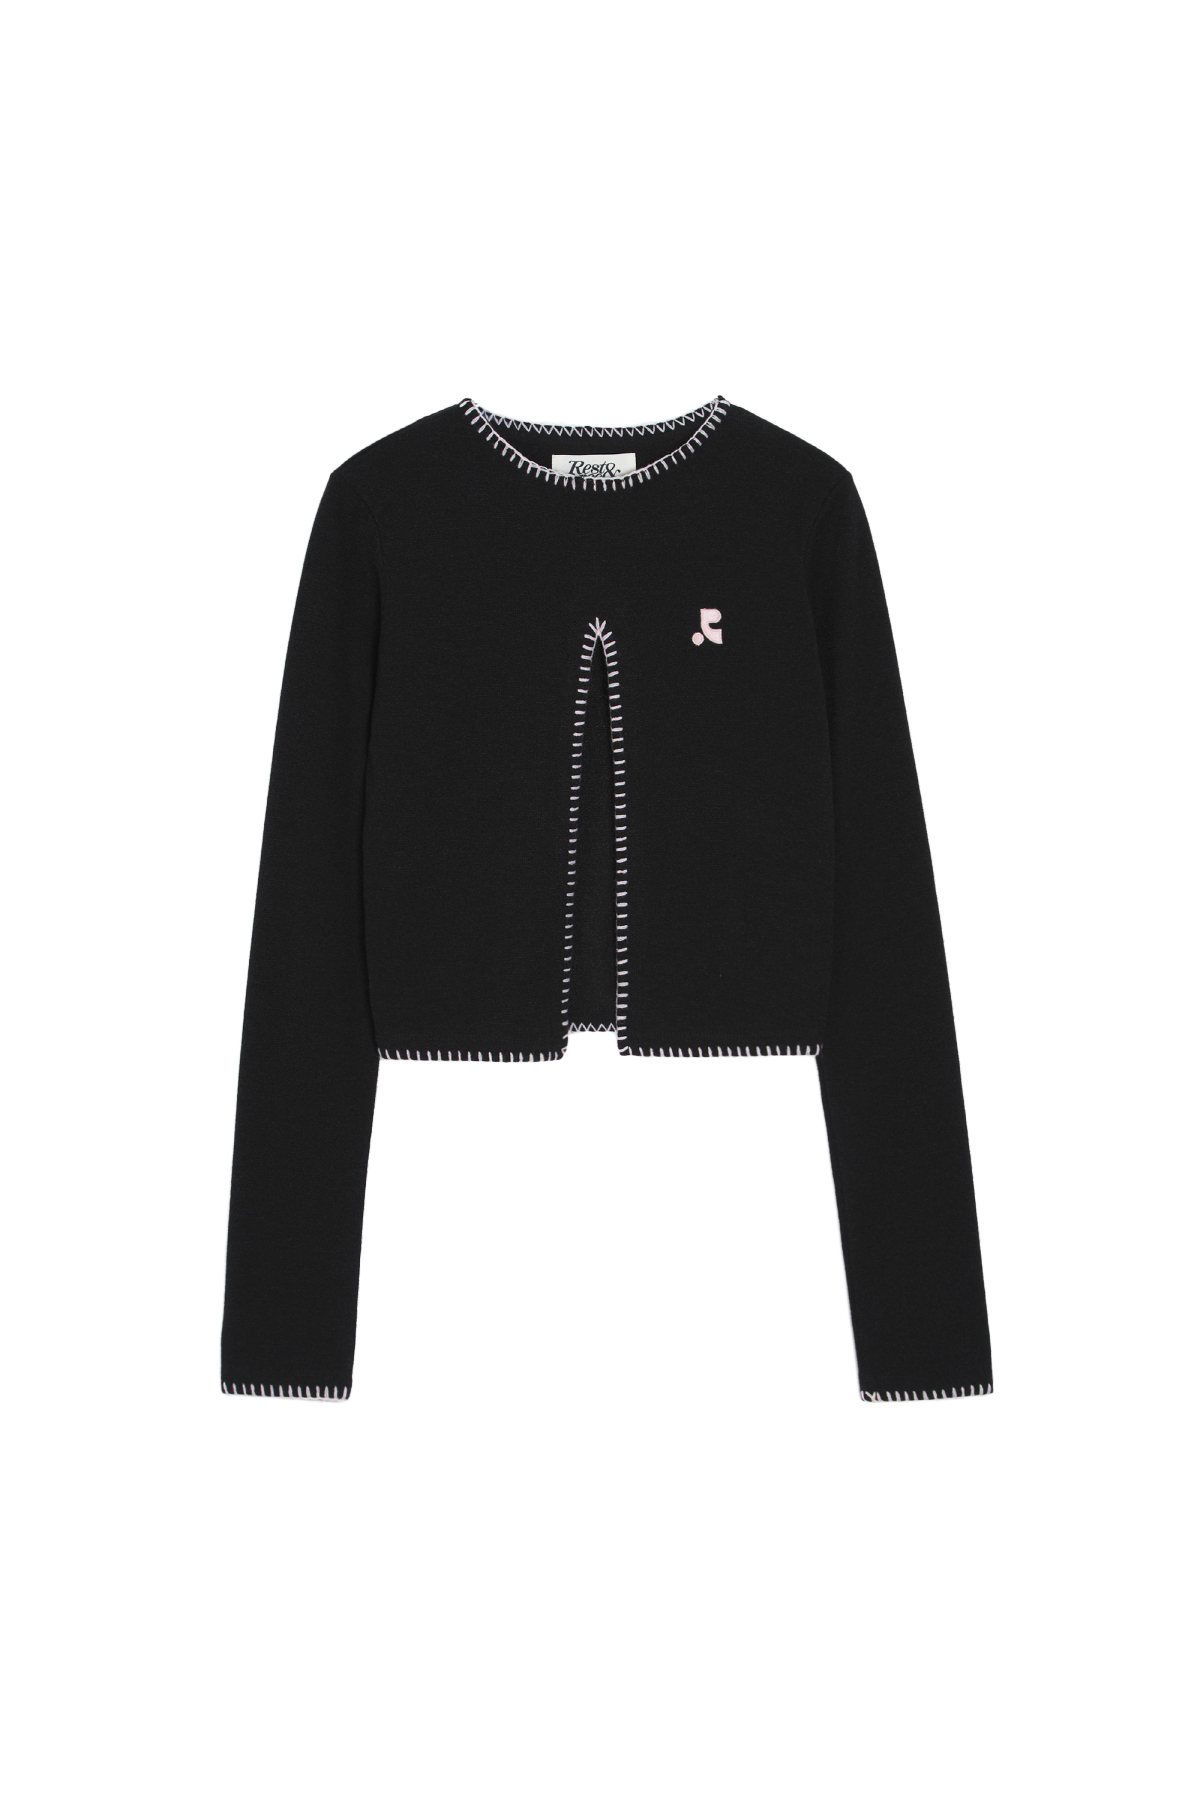 RR CUT OUT LONG SLEEVE KNIT TOP - BLACK